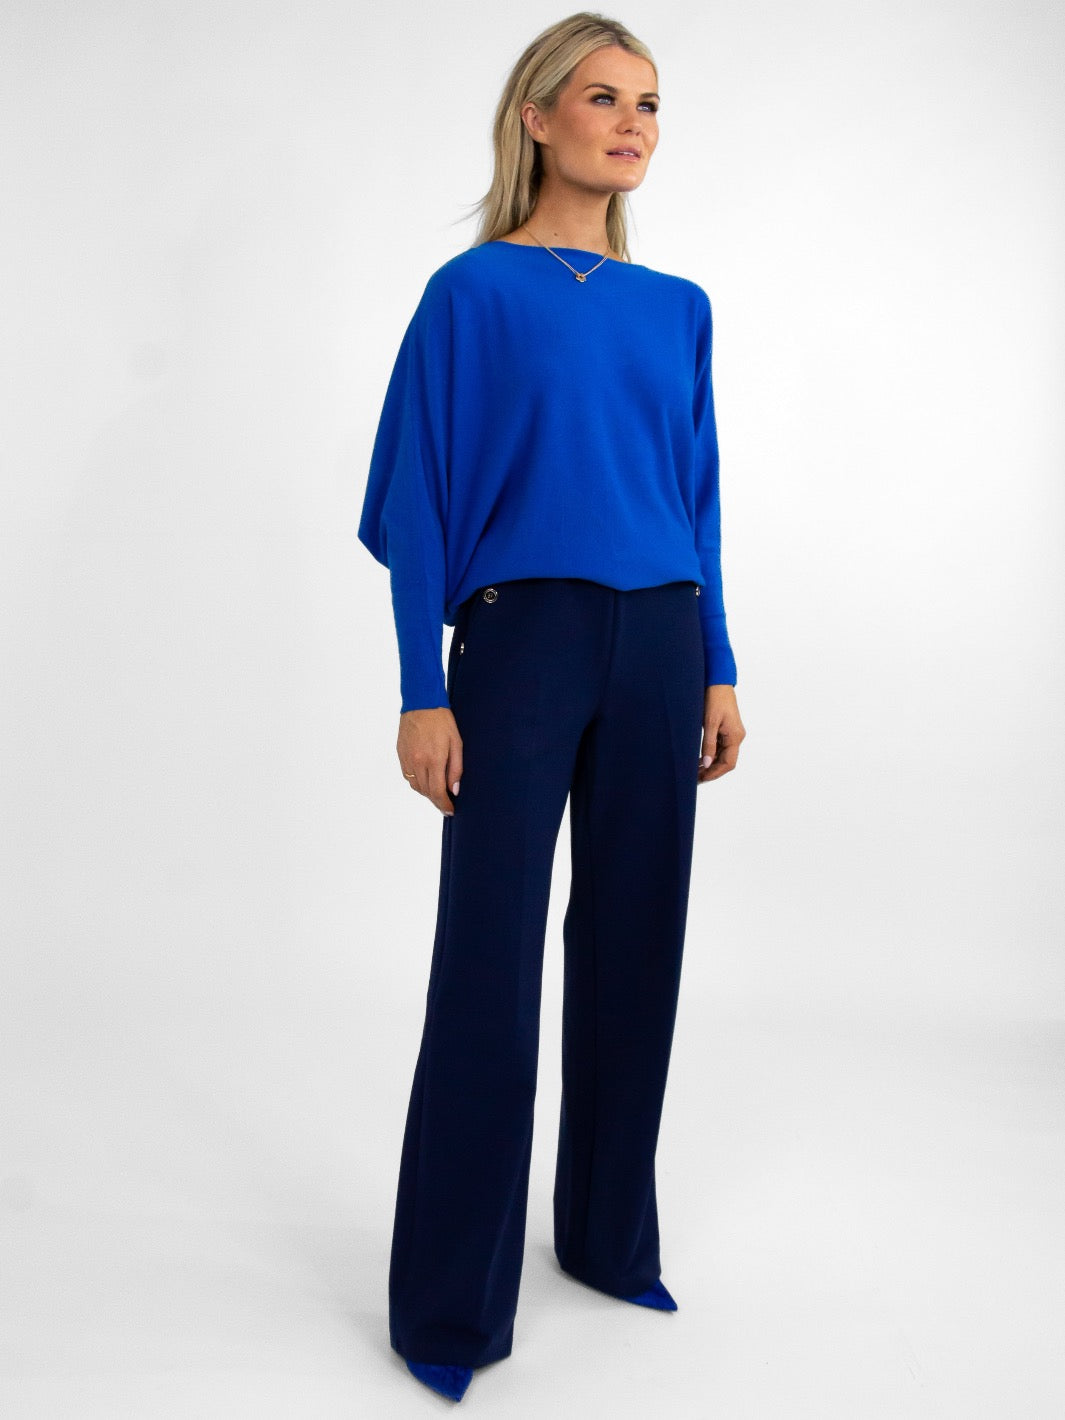 Kate & Pippa Sardinia Button Trousers In Navy-Nicola Ross